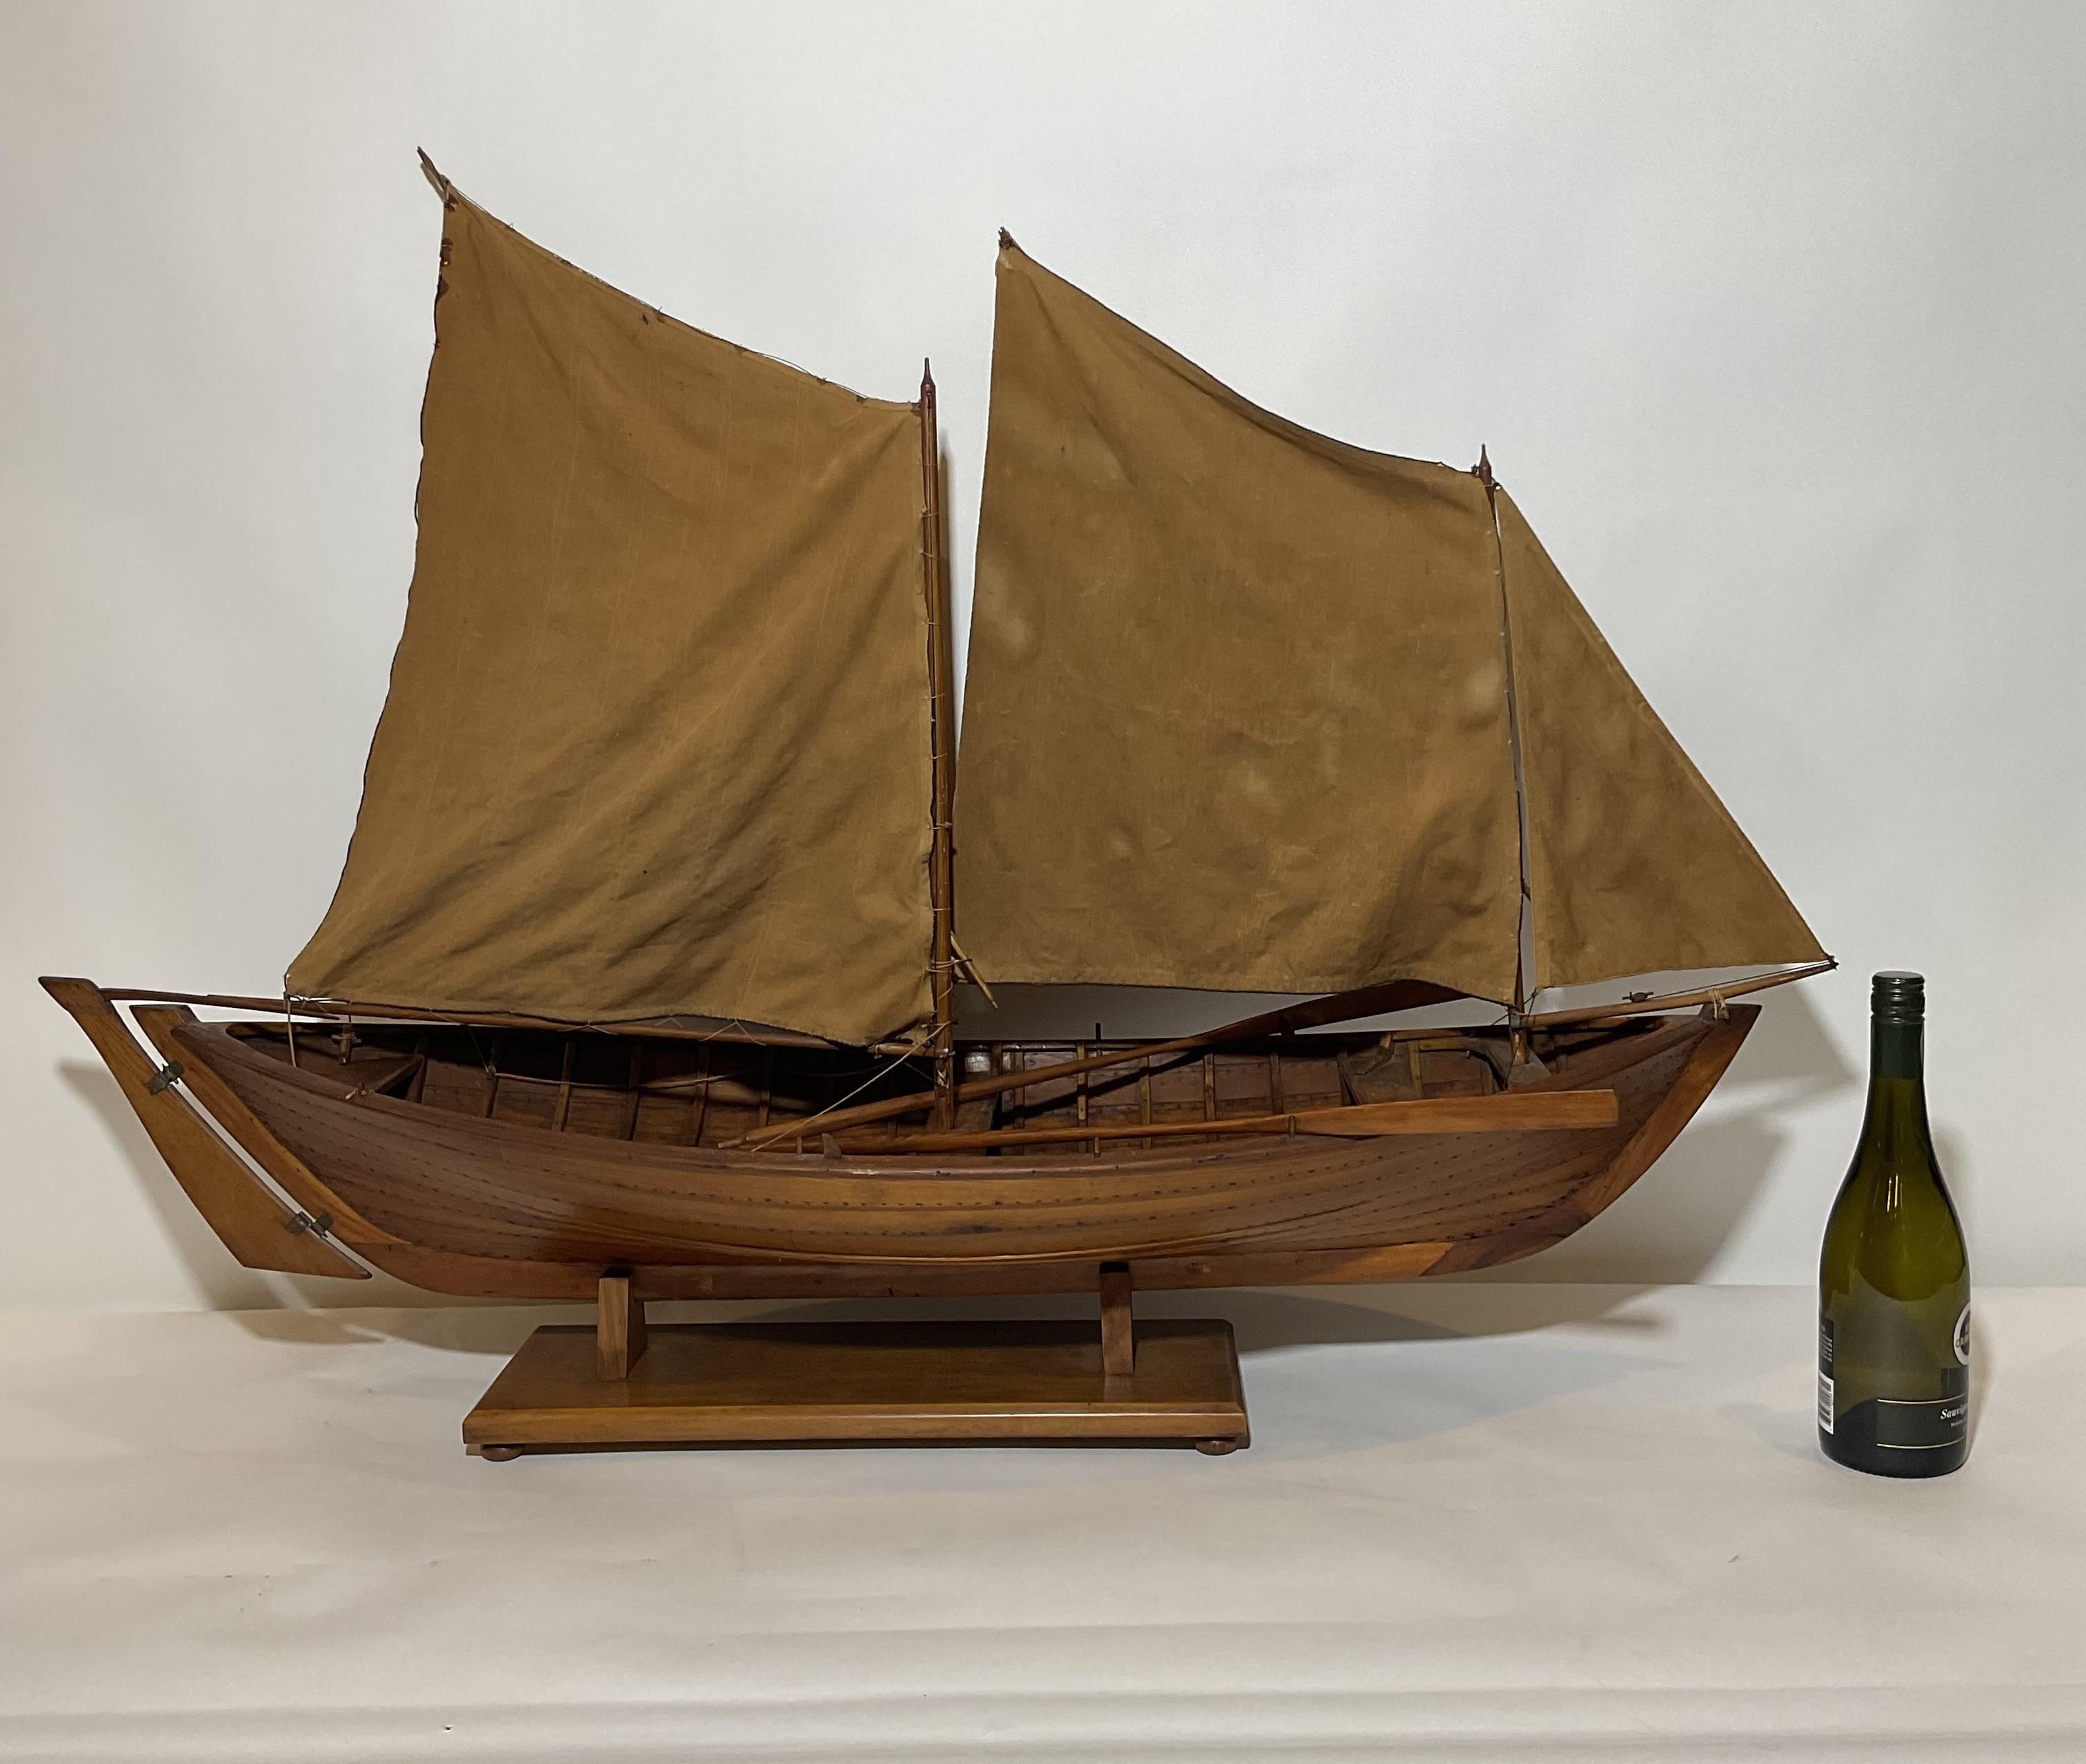 Plank of frame model of a two masted lateen rigged open hulled coastal transport craft planked and ribbed hull with benches. Two varnished oars are on board. Expertly built. Circa 1920.

Weight: 5 lbs.
Overall Dimensions: 32